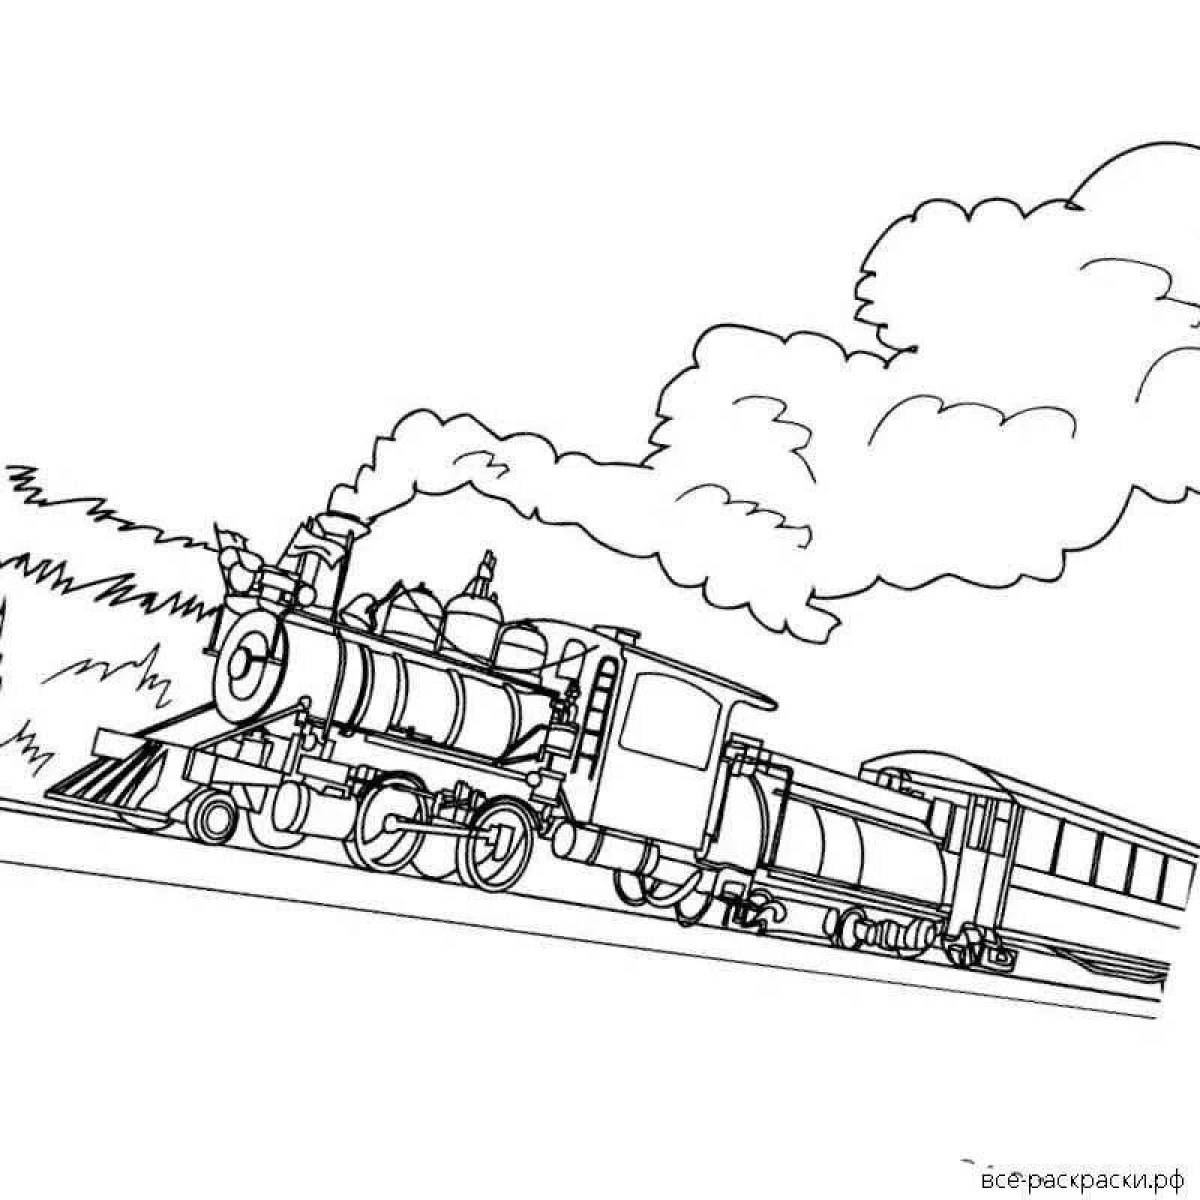 Detailed military train coloring book